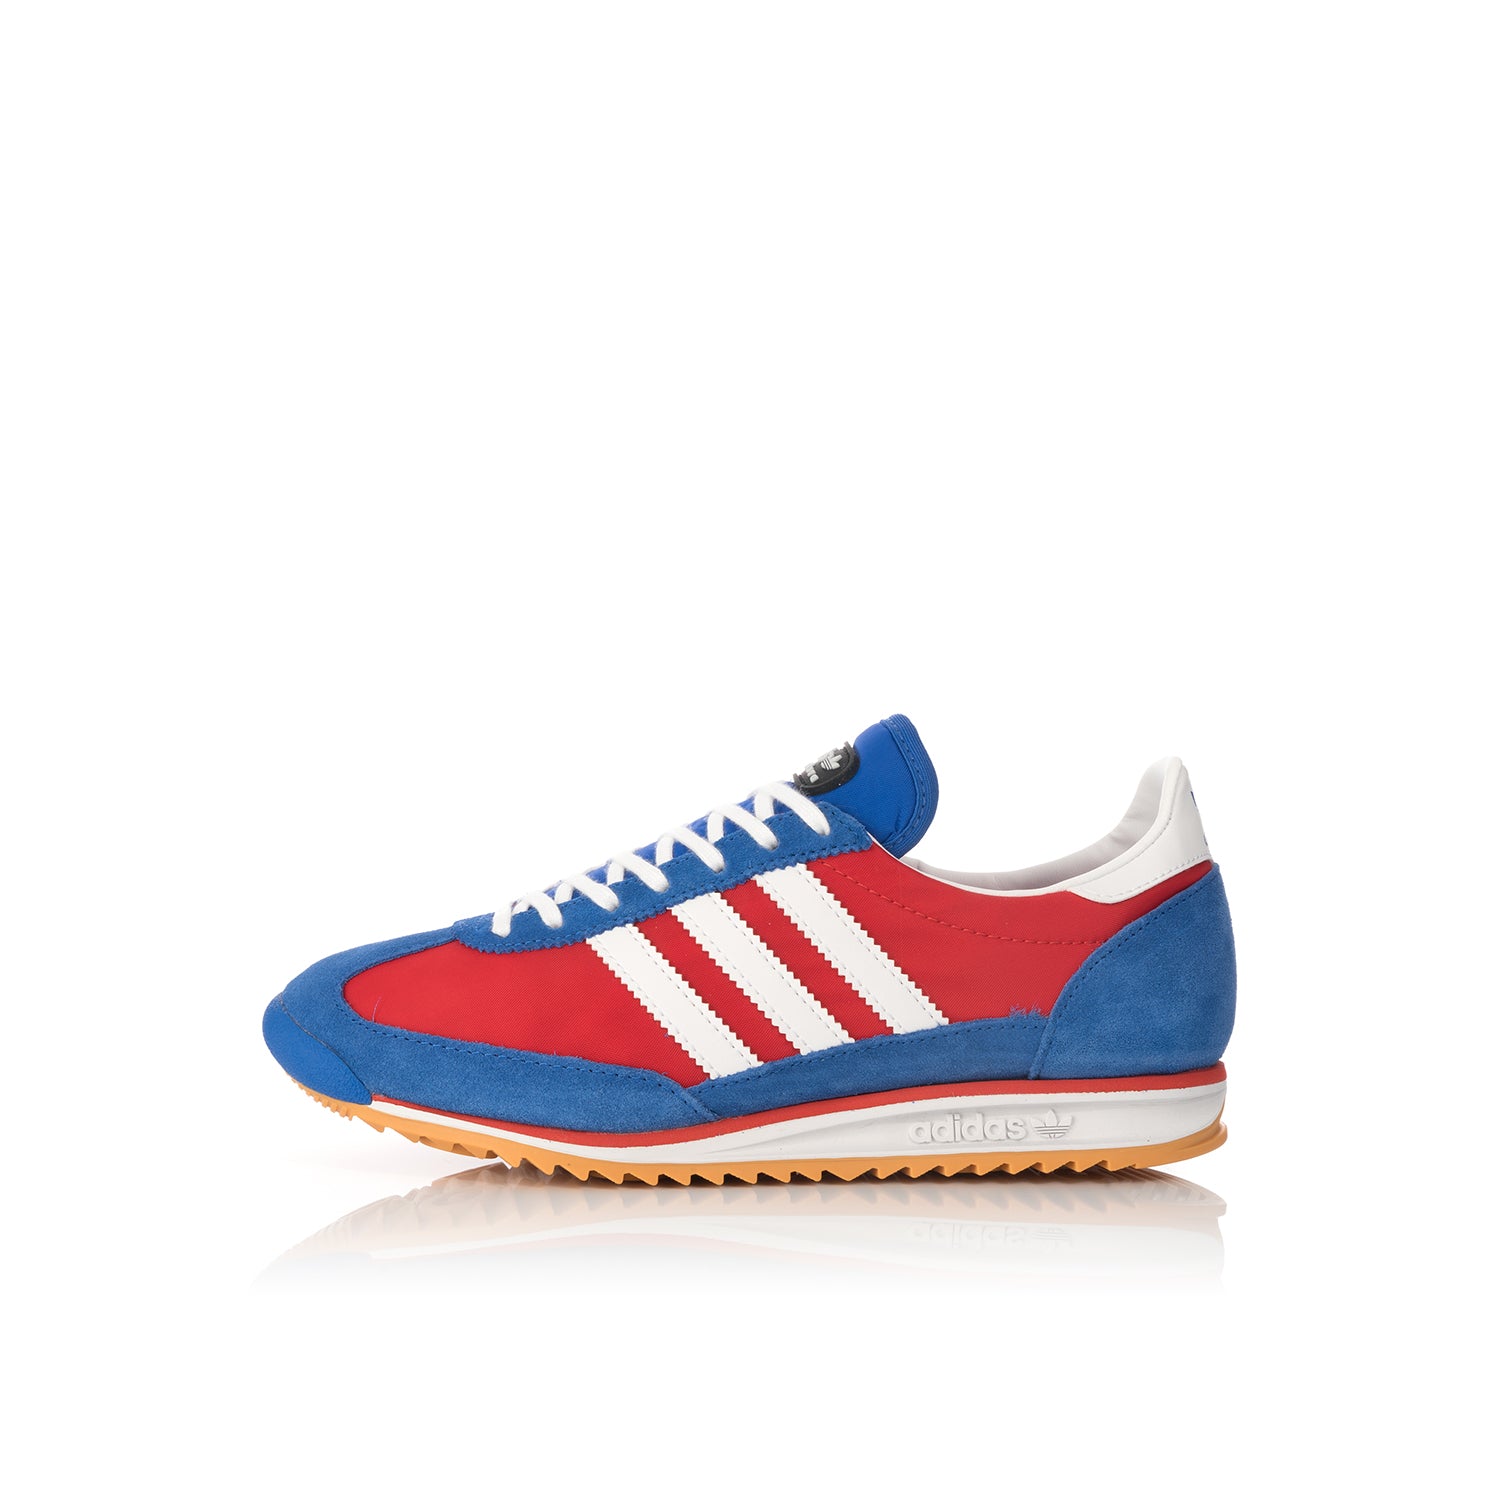 red blue and white adidas